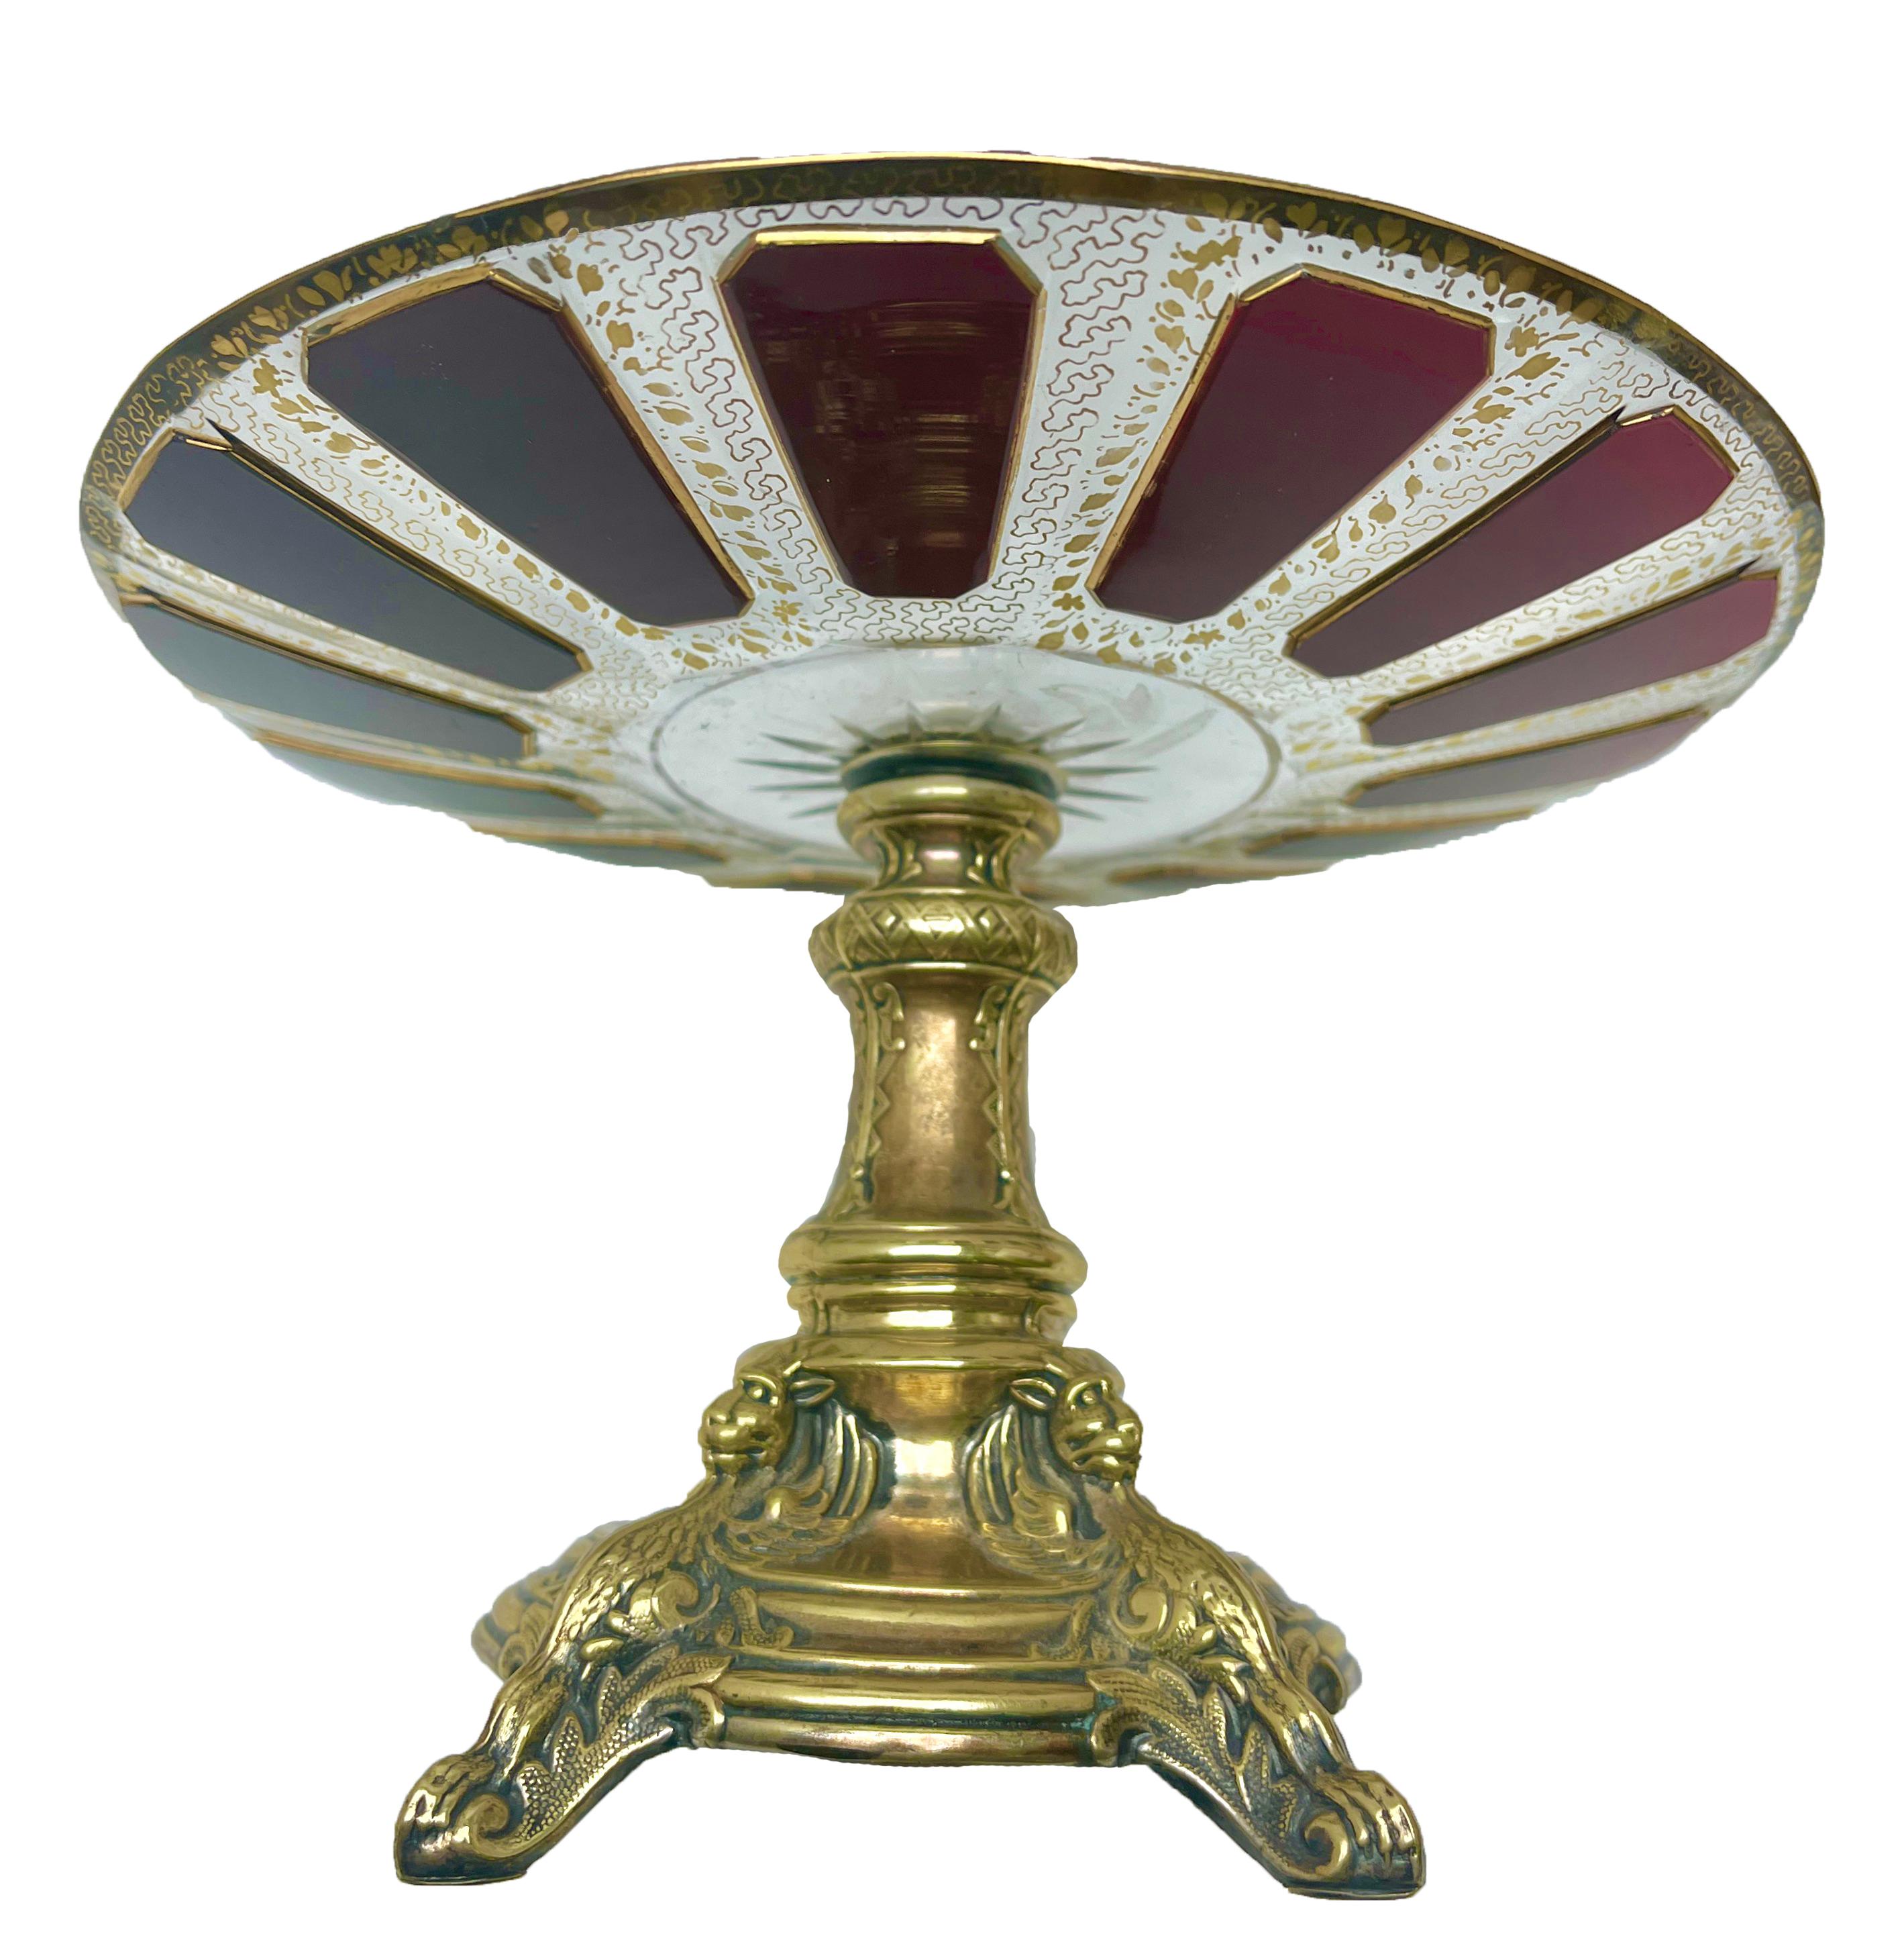 Early 20th Century Art Nouveau Centrepiece Attributed to Kayser in Germany, circa 1900 For Sale